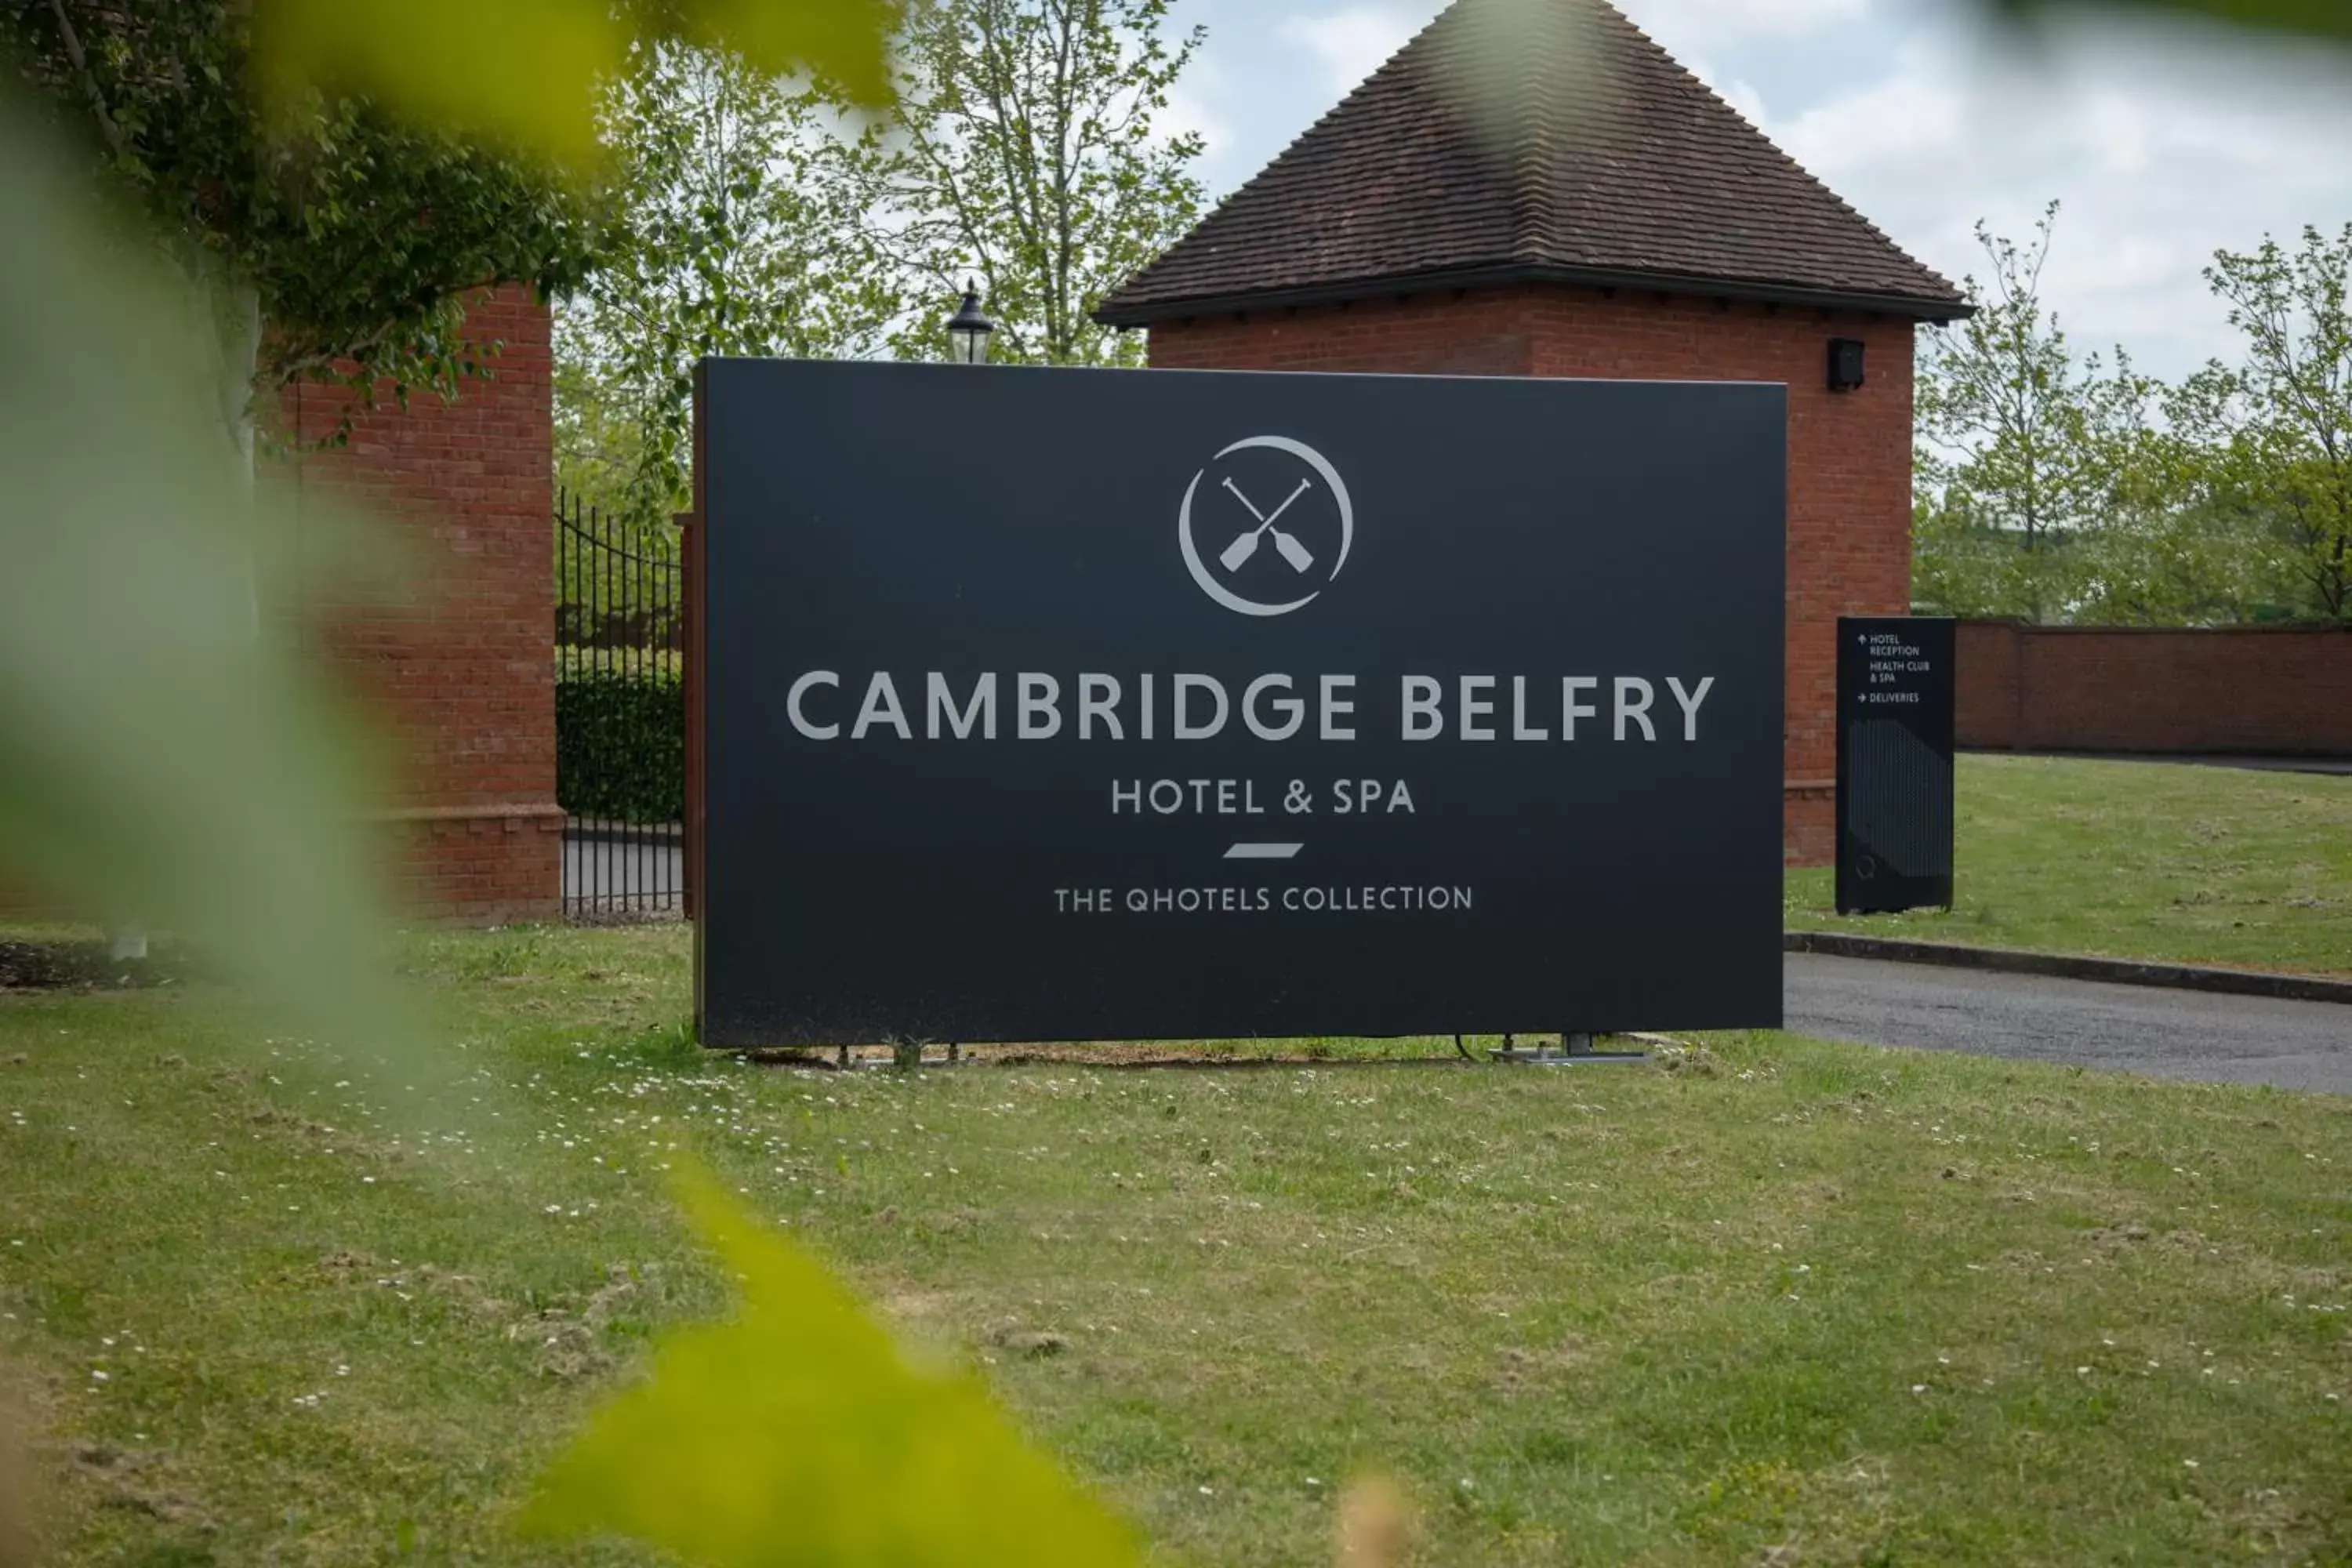 Property logo or sign in Cambridge Belfry Hotel & Spa